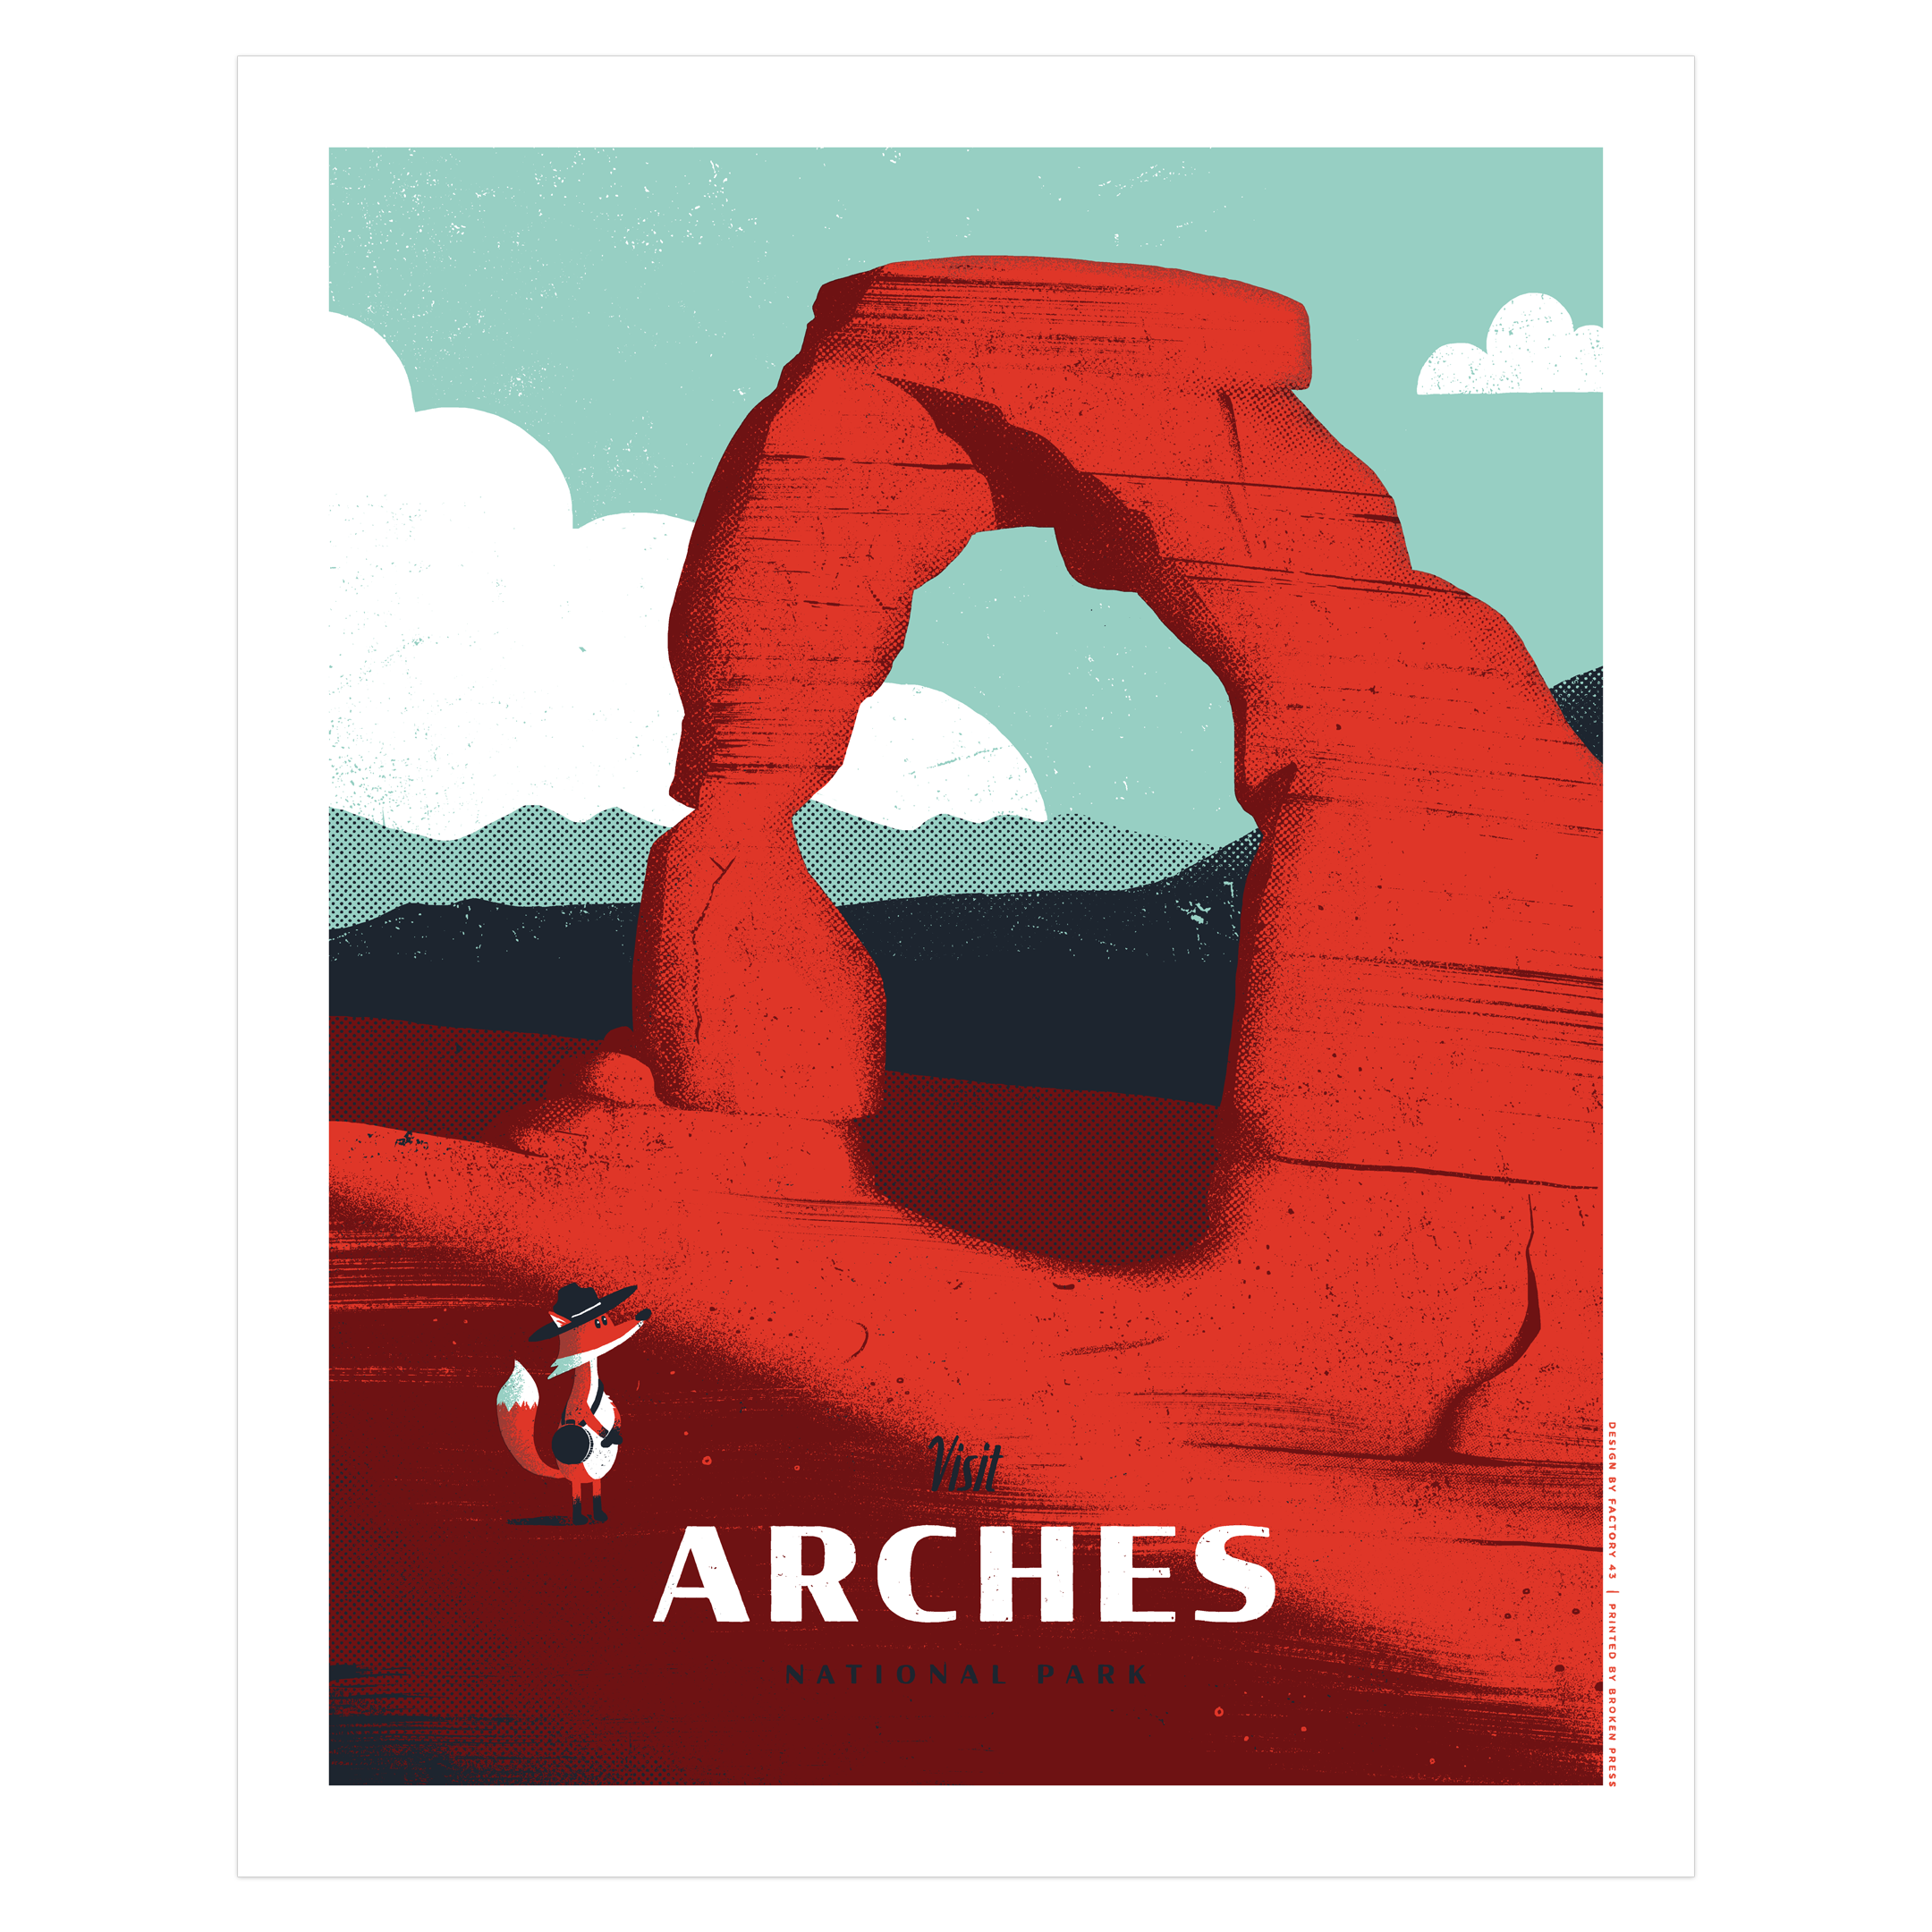 Arches National Park poster featuring a fox with a hat and canteen admiring red rocks of Delicate Arch in Utah.